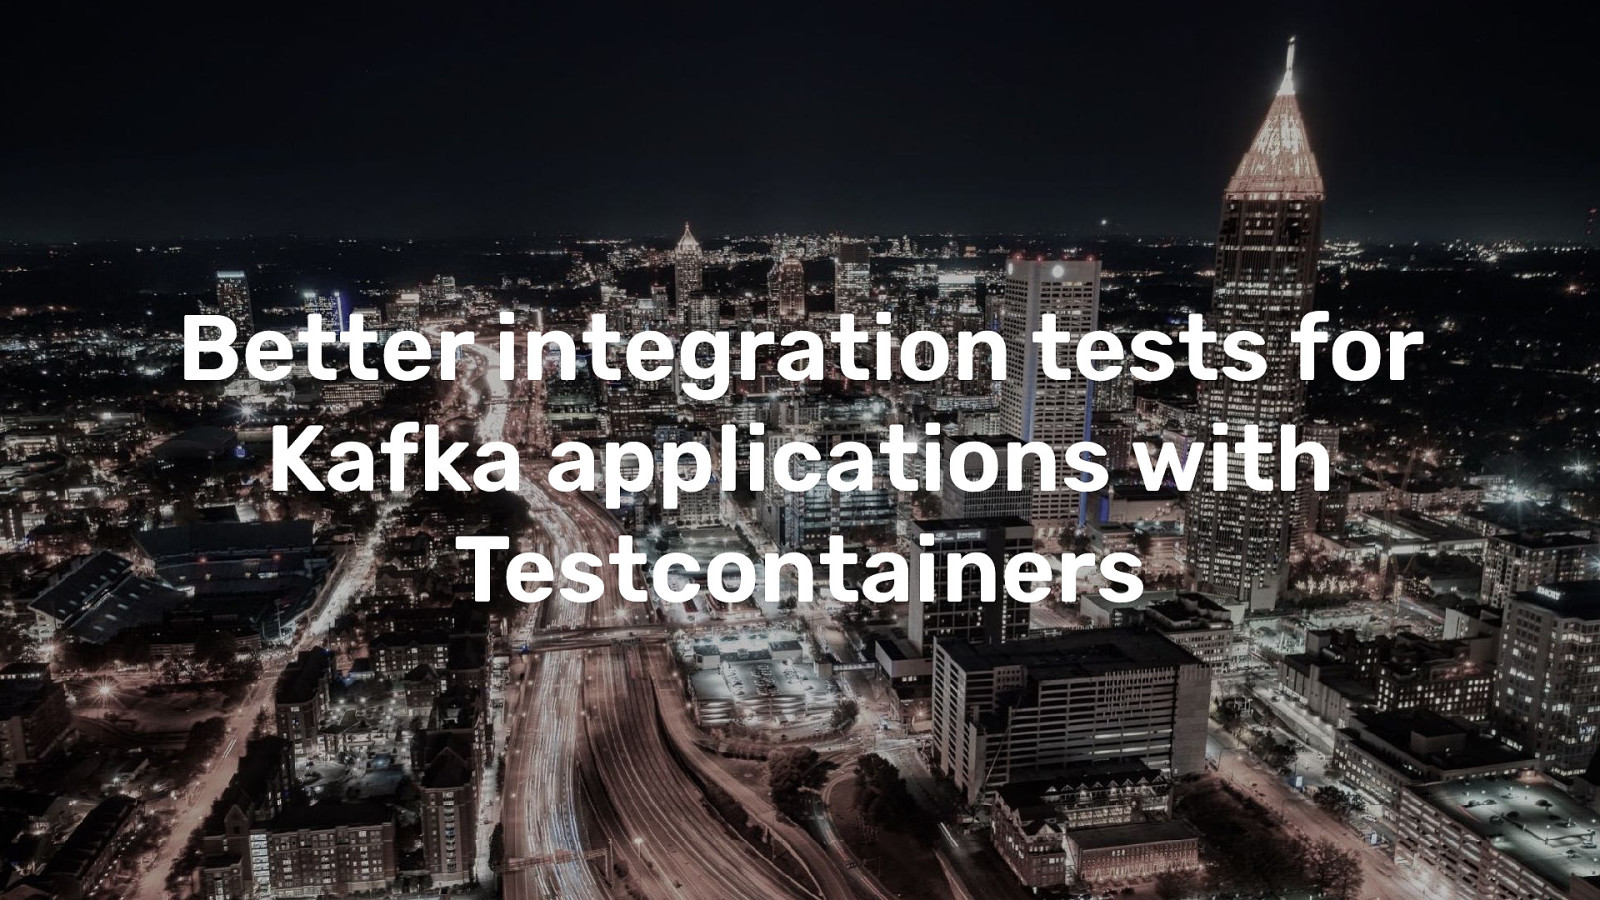 Better integration tests for Kafka applications with Testcontainers